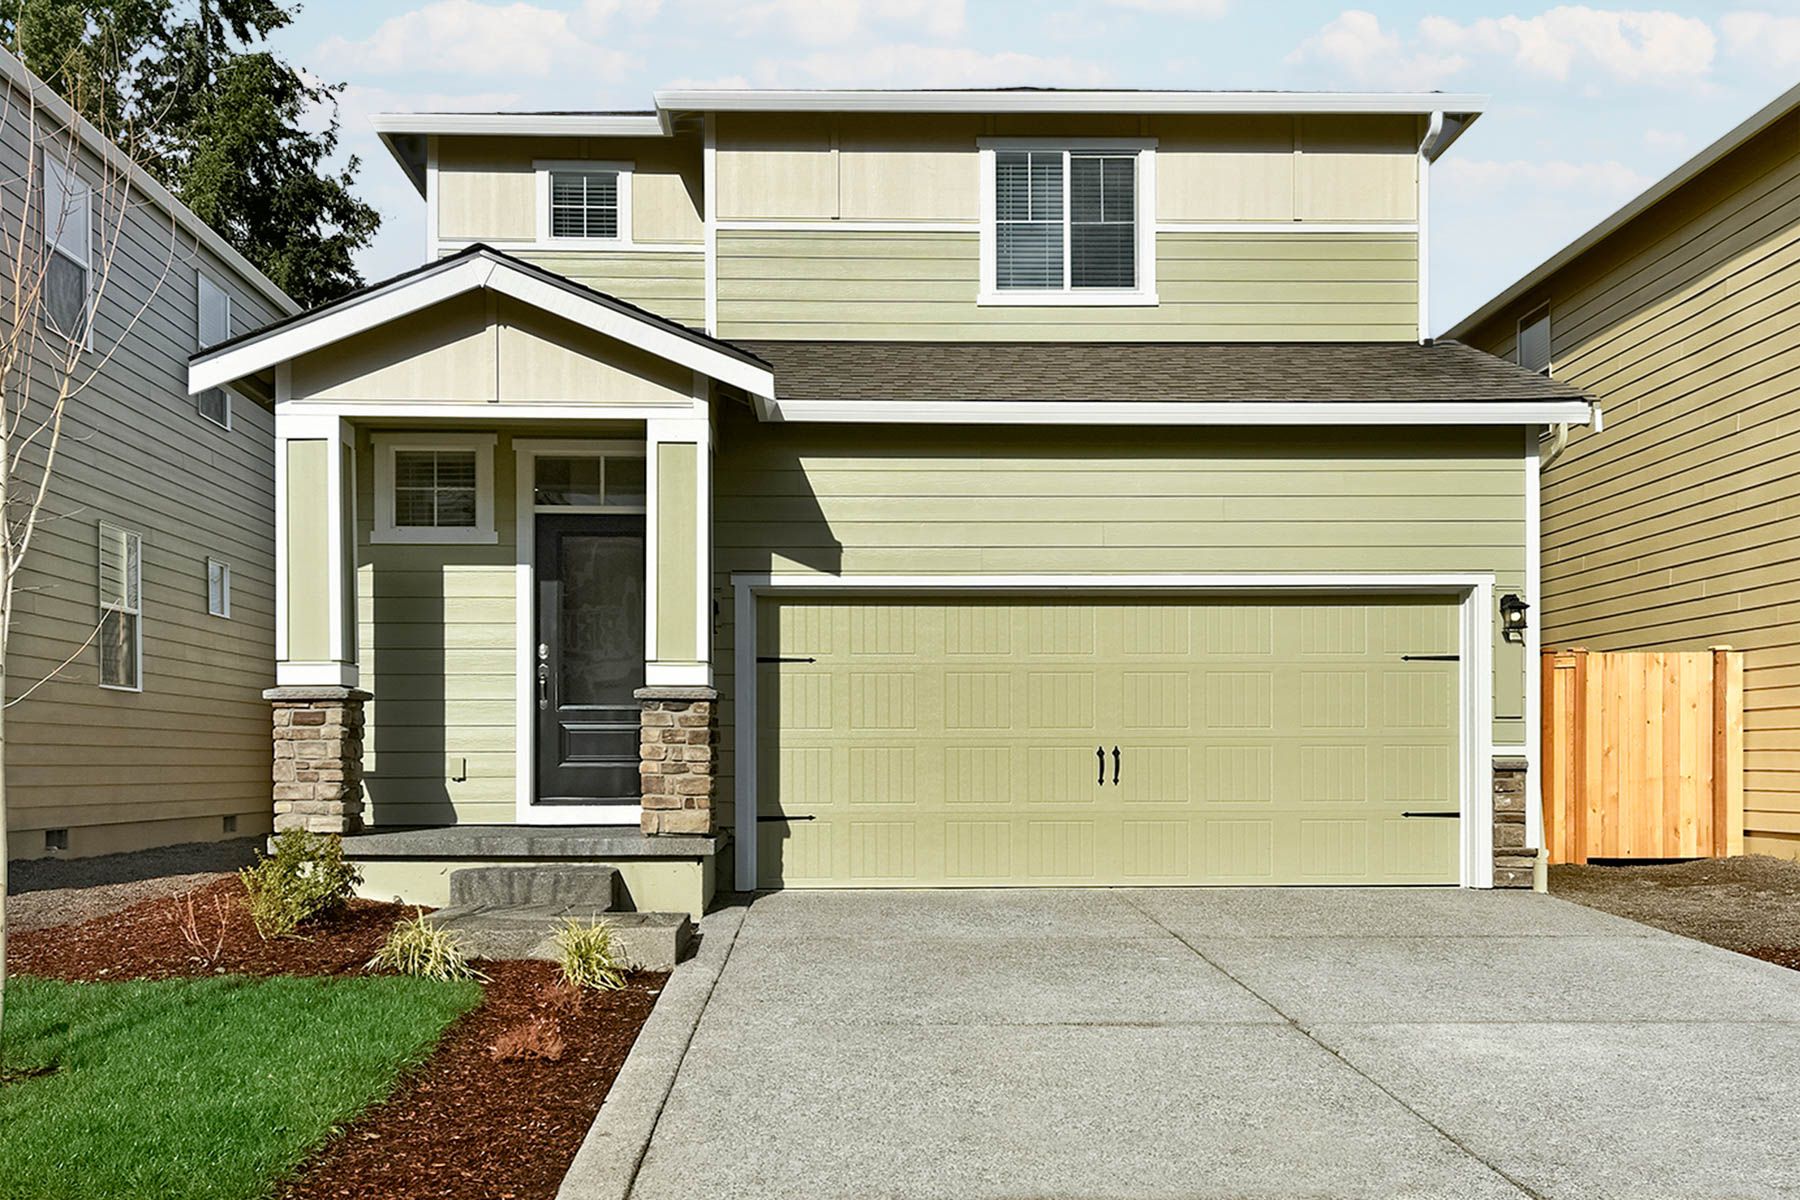 The Mason by LGI Homes:The Mason is a gorgeous three-bedroom home at 5th Plain Creek Station!